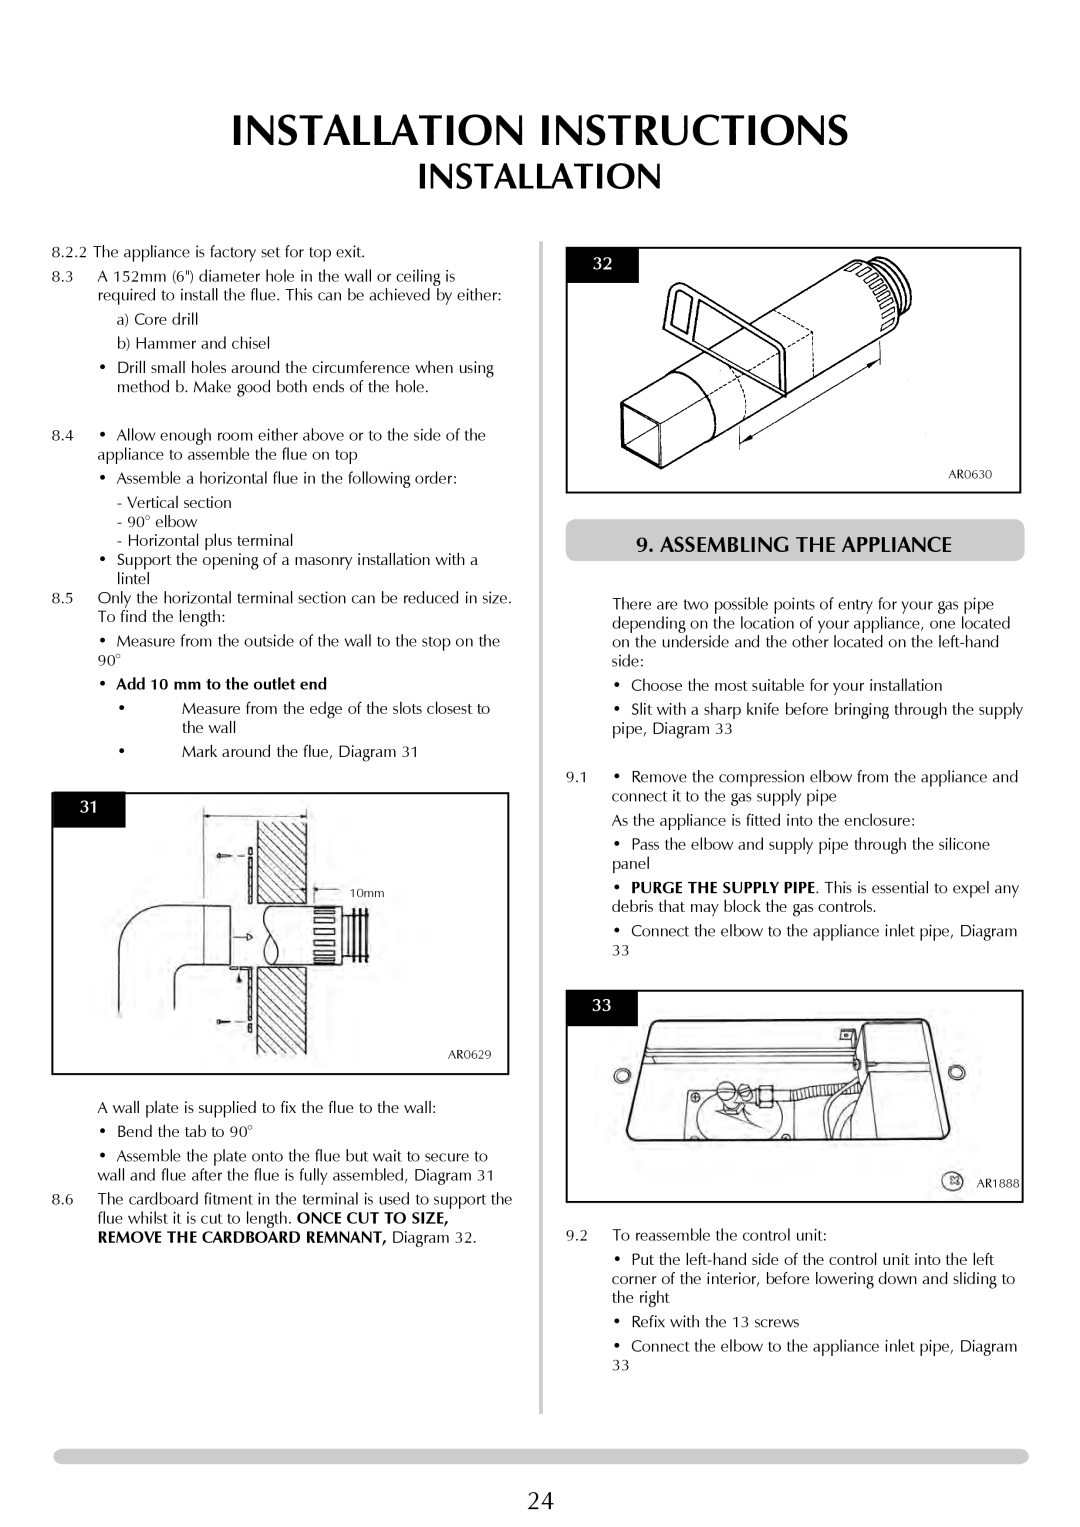 Stovax Studio 22 manual Assembling The Appliance, Installation Instructions, Add 10 mm to the outlet end 